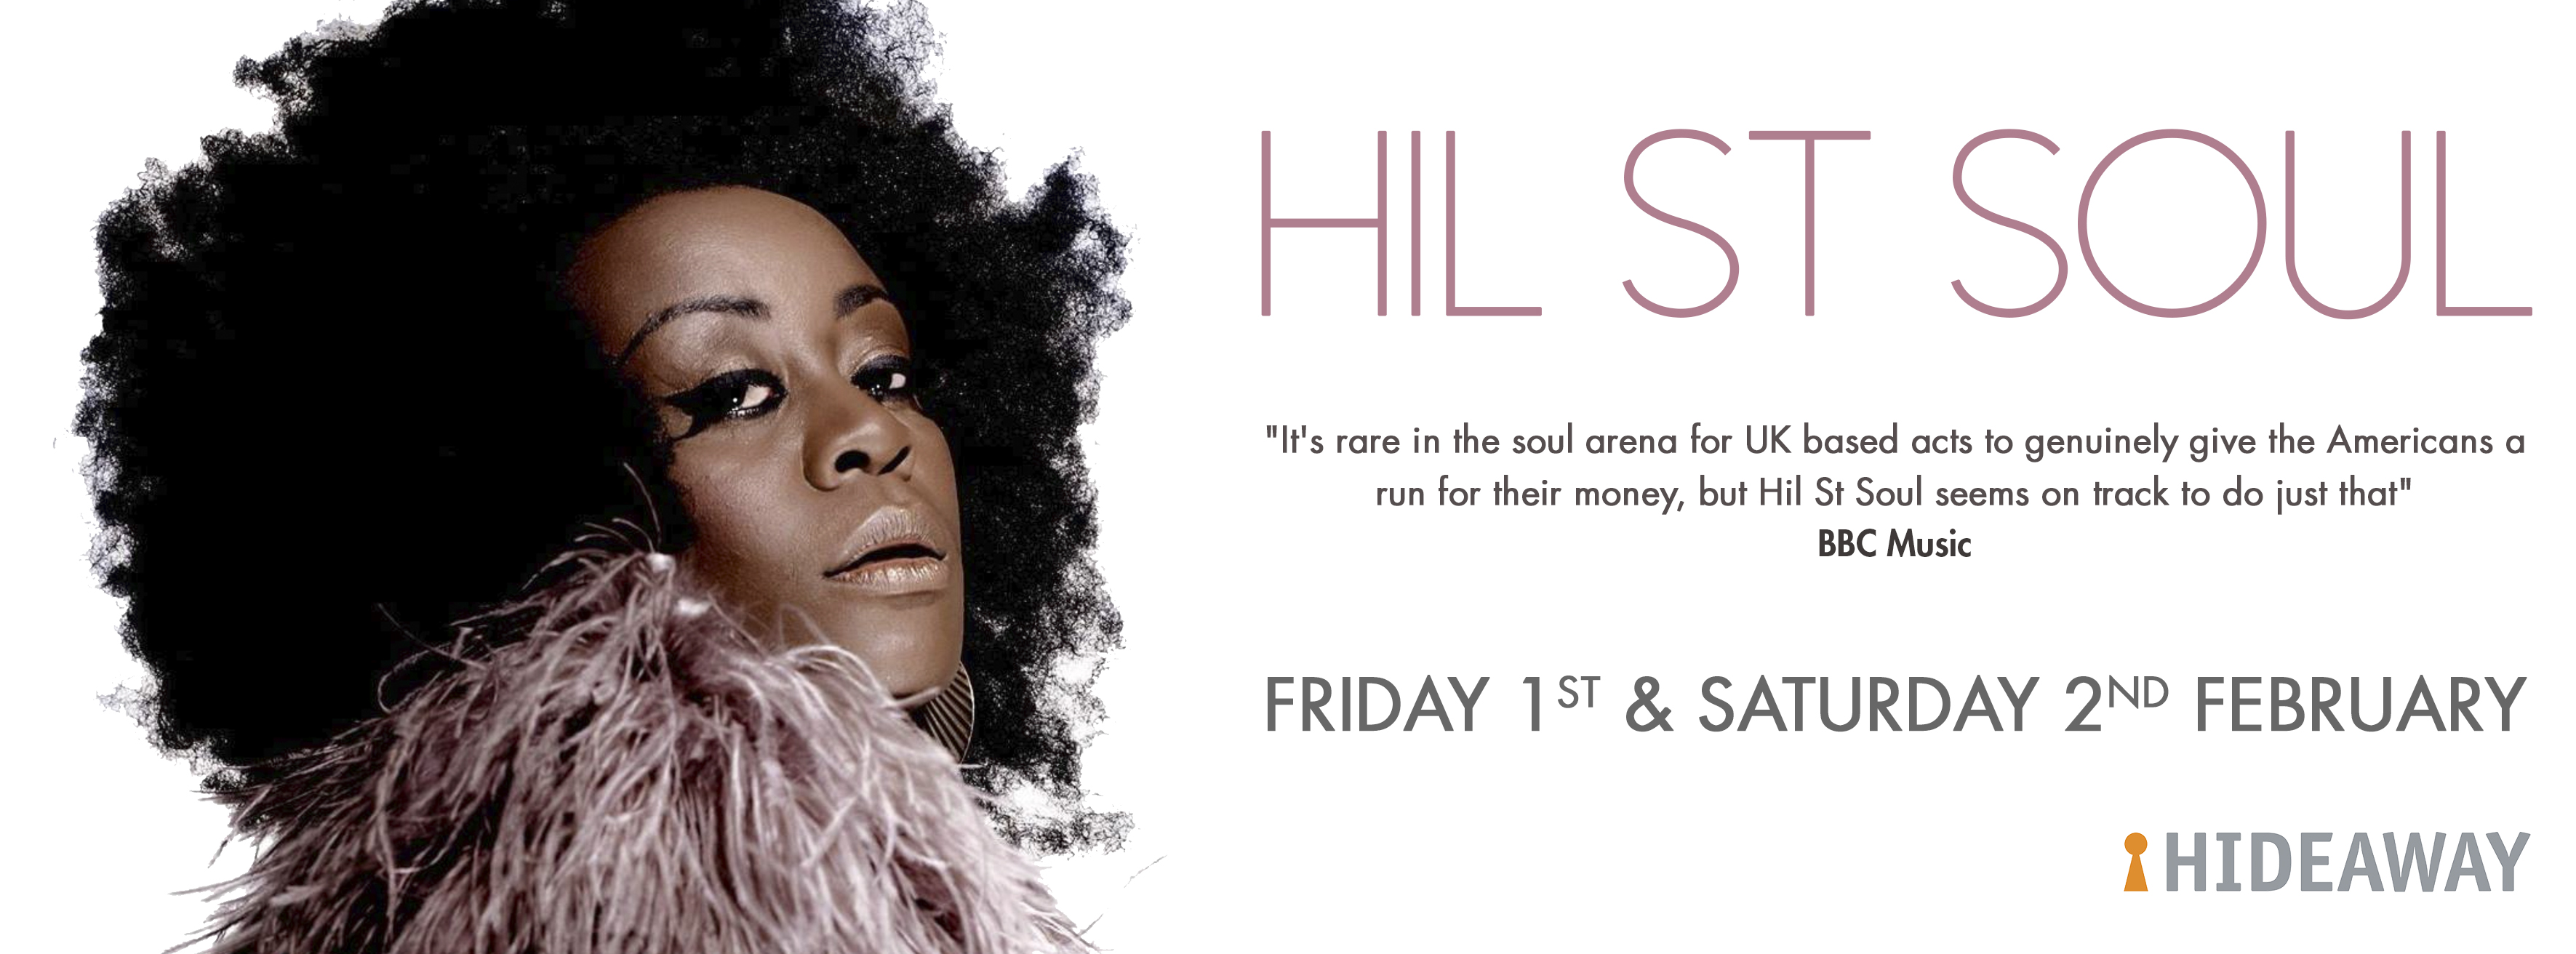 Hil St Soul Friday 1st and Saturday 2nd February at Hideaway Jazz Club